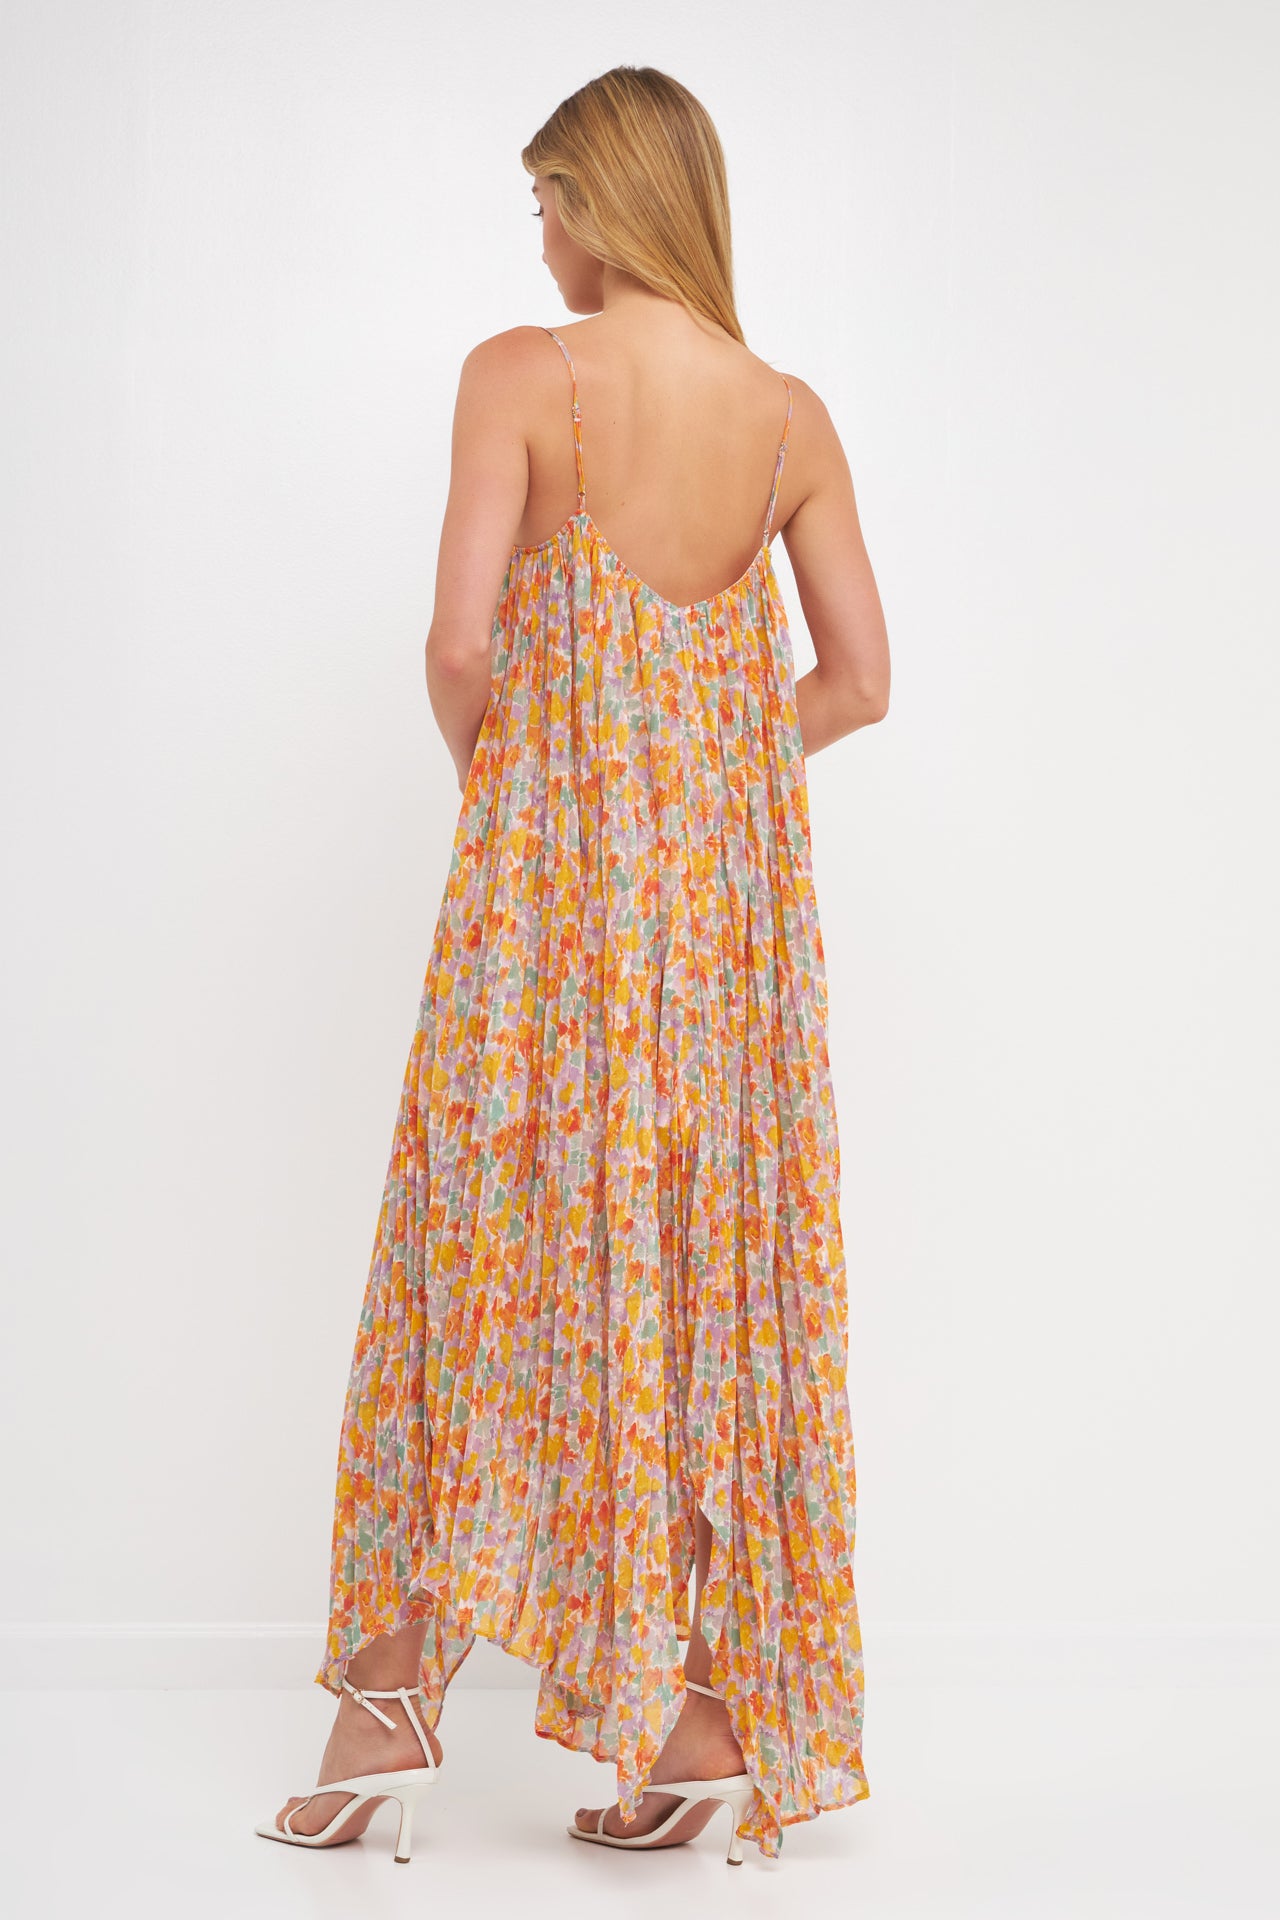 ENDLESS ROSE - Pleated Waterfall Maxi Dress - DRESSES available at Objectrare